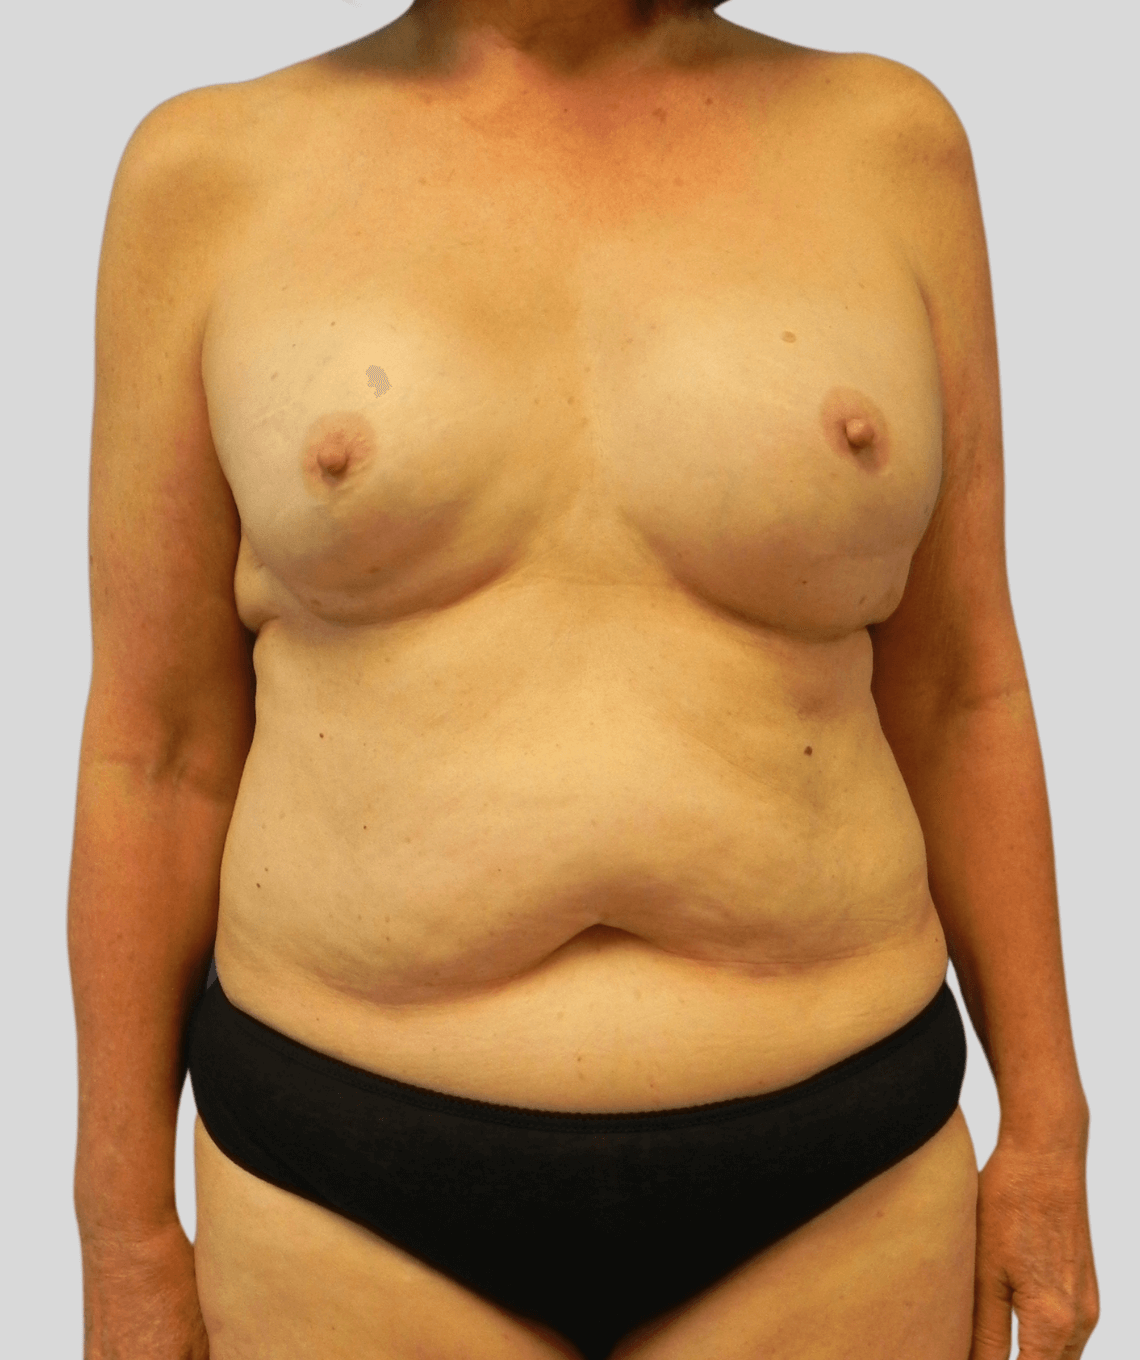 corrective breast reconstruction - prma plastic surgery - before and after photos